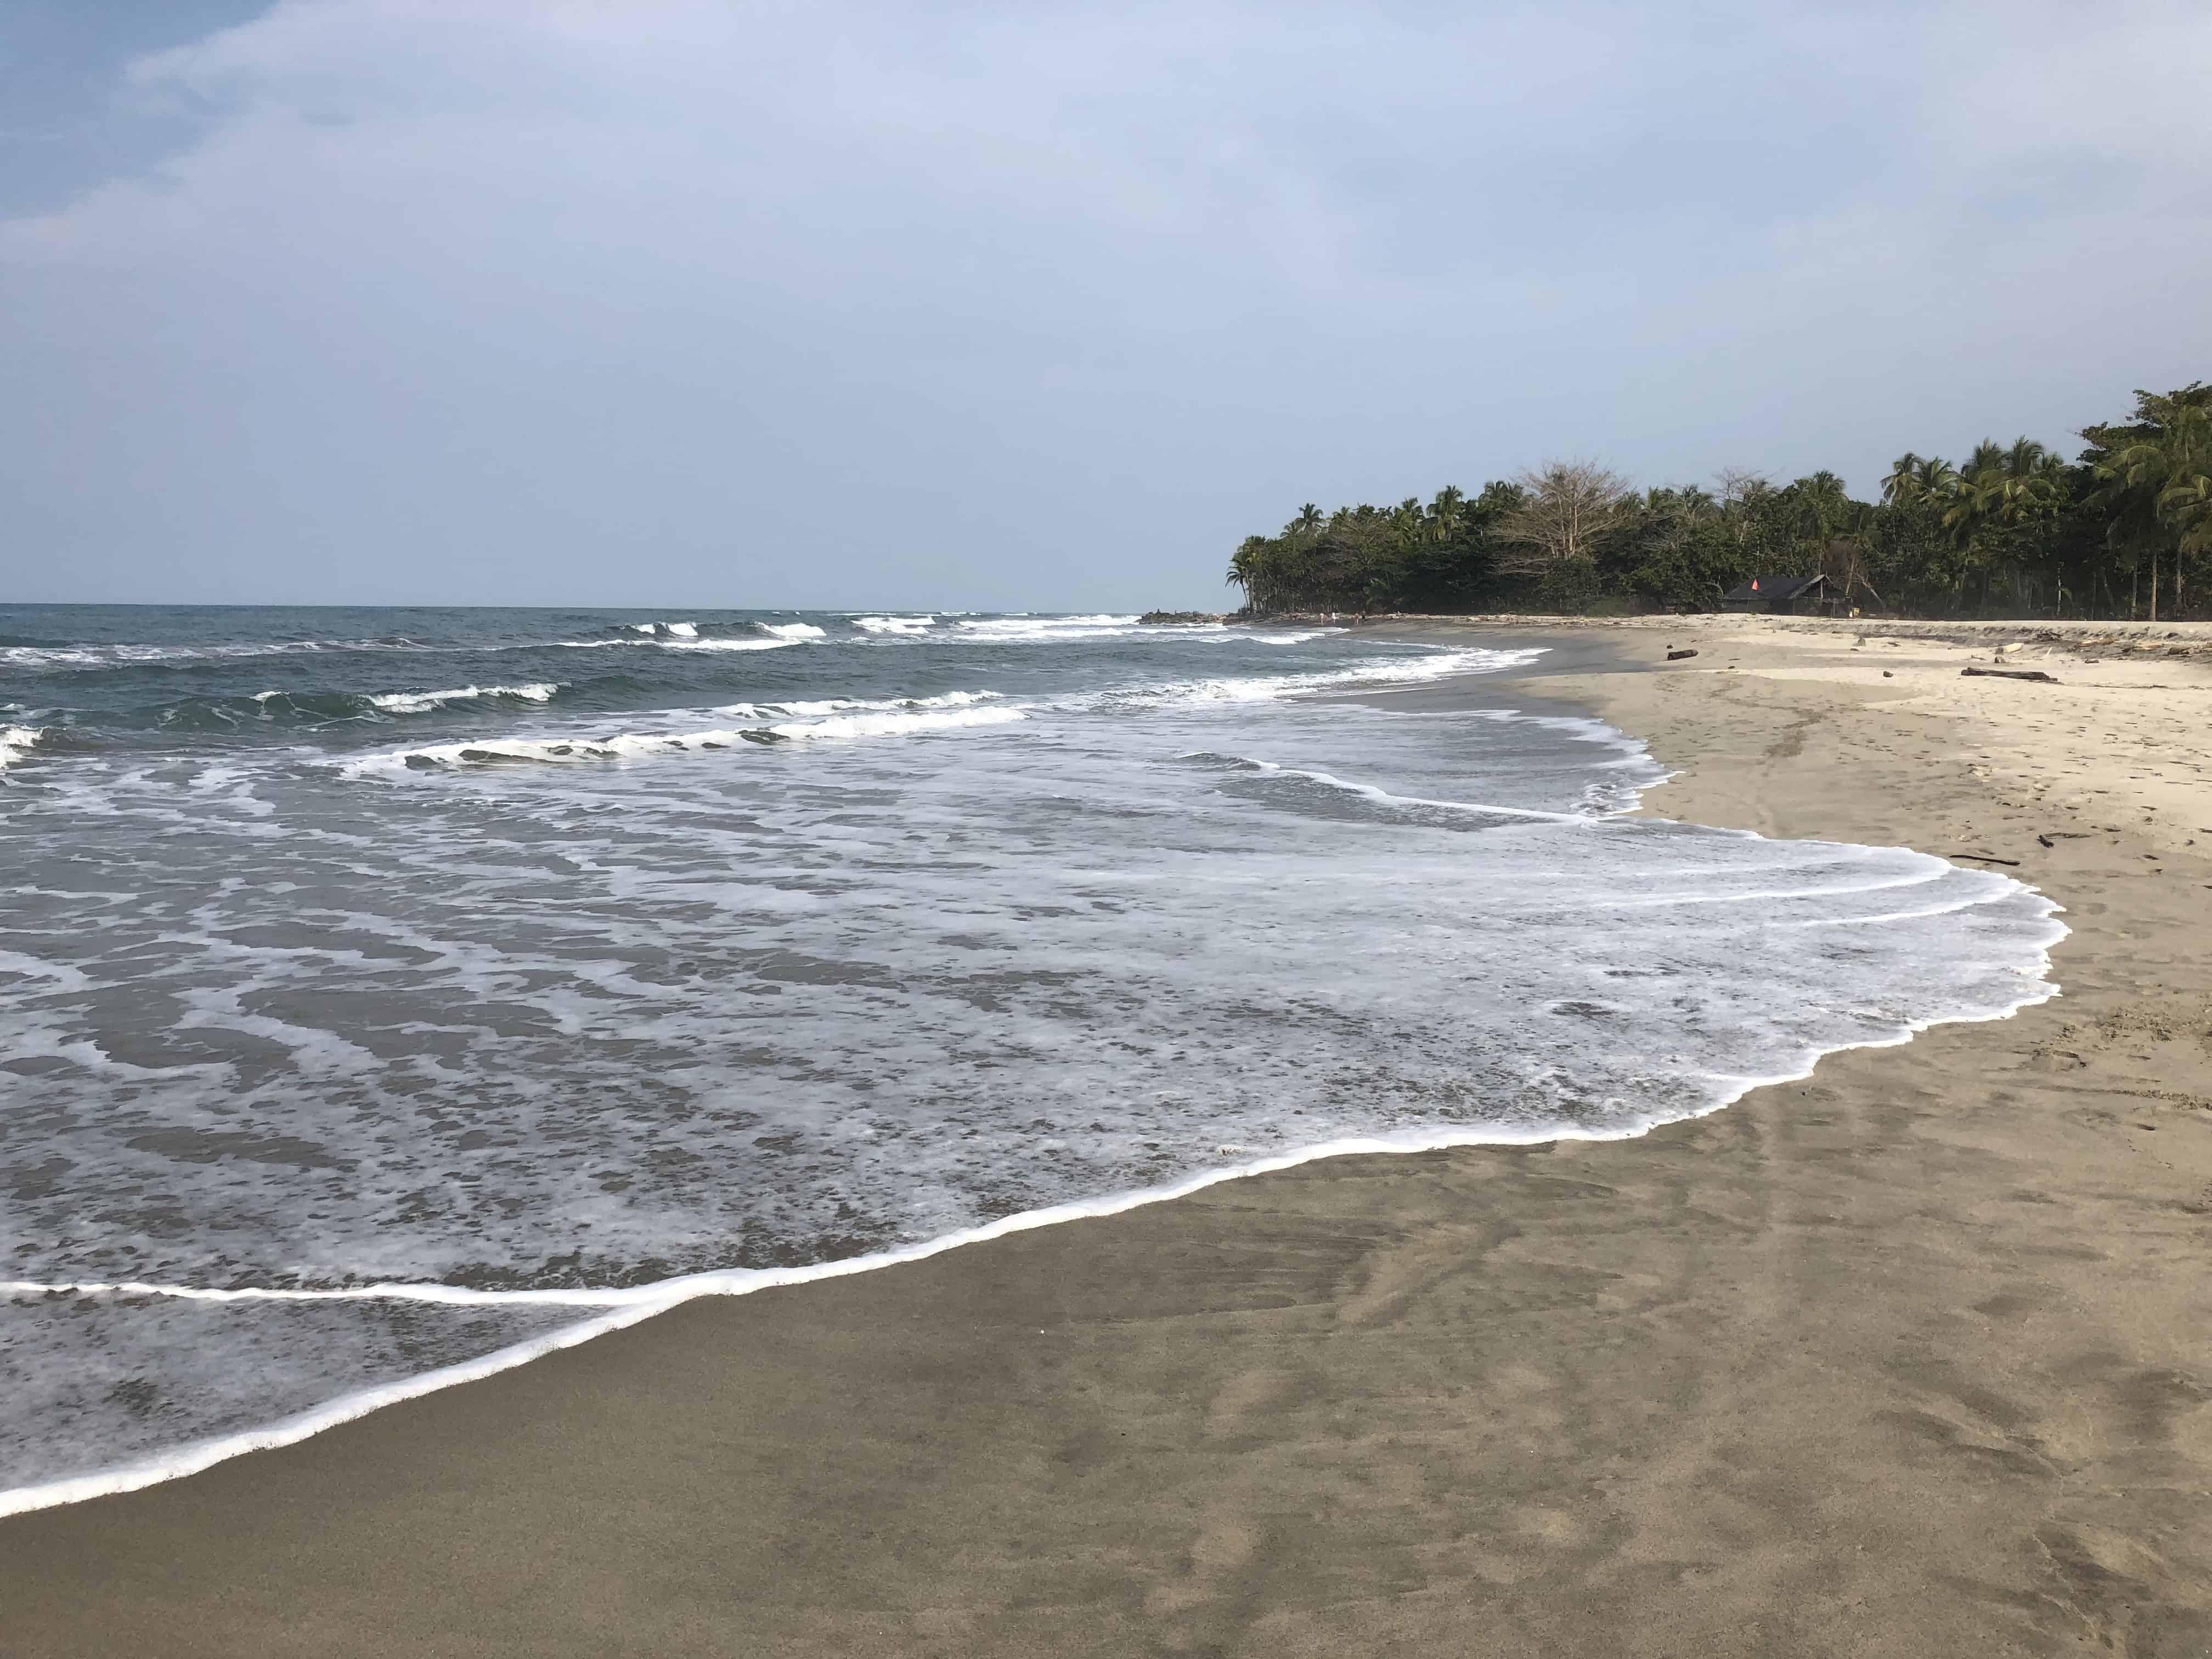 The far end of the beach at Buritaca, Magdalena, Colombia